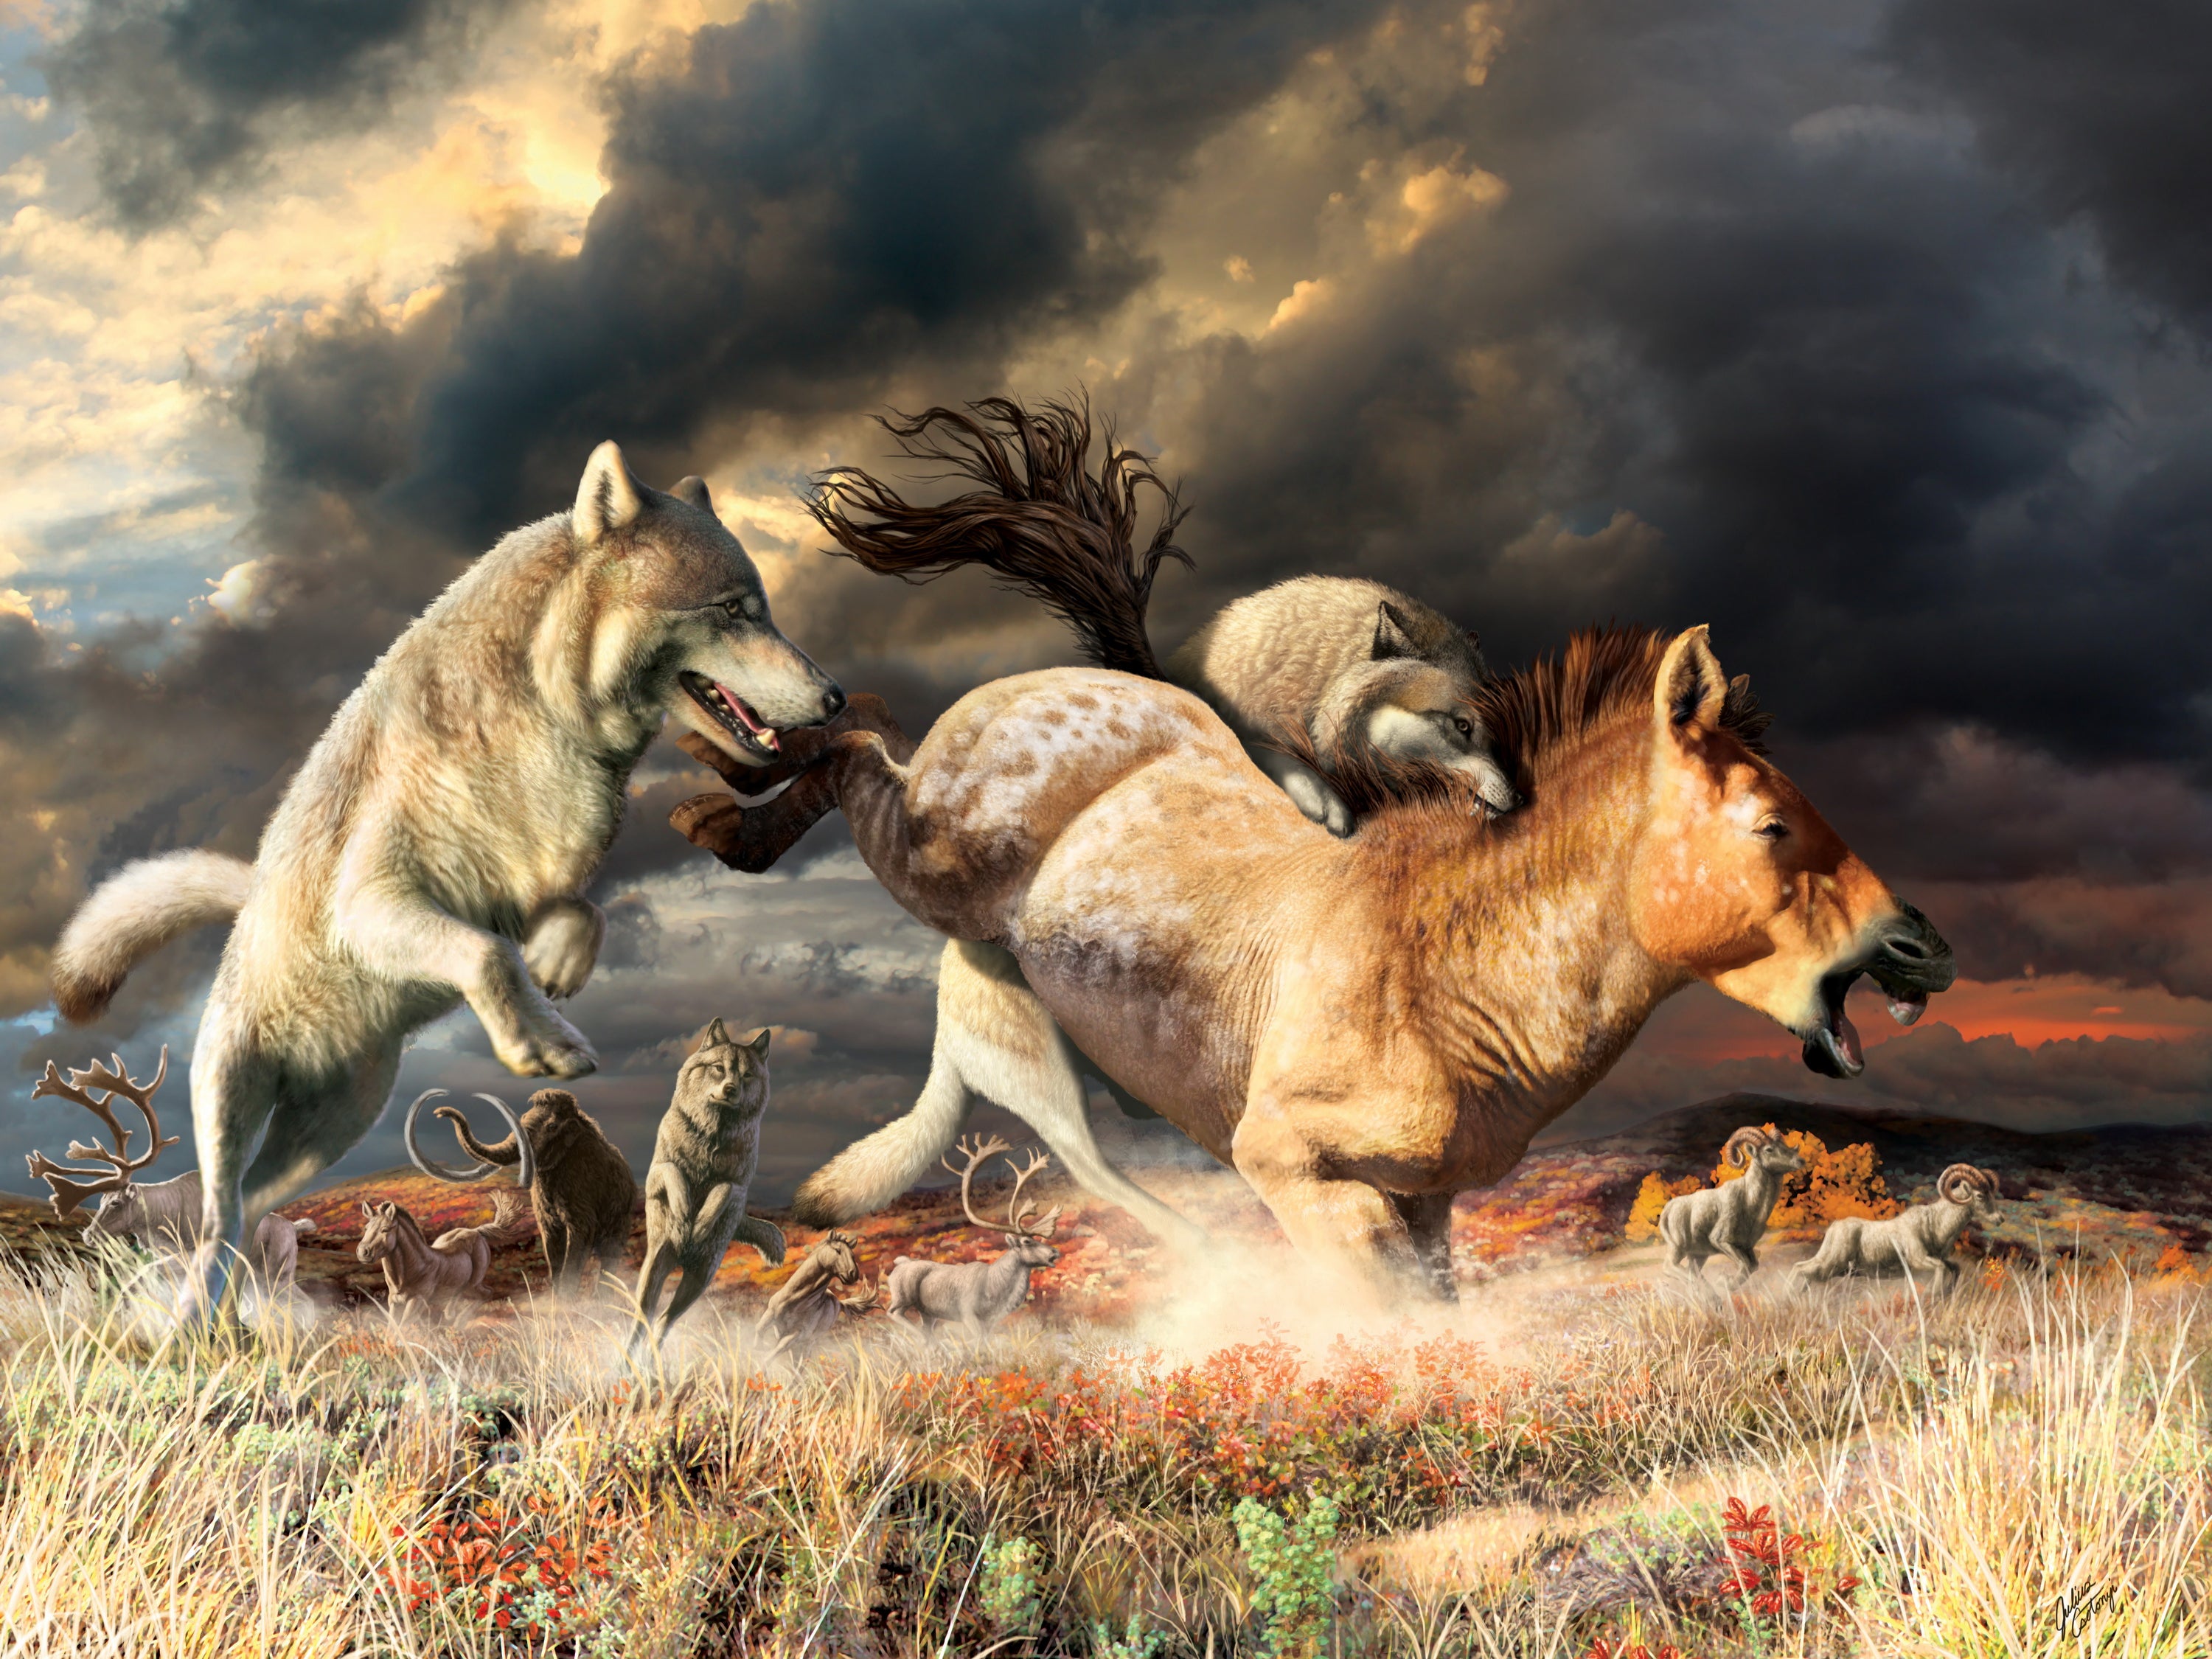 Grey wolves take down a horse on the mammoth-steppe habitat of Beringia during the late Pleistocene (around 25,000 years ago)